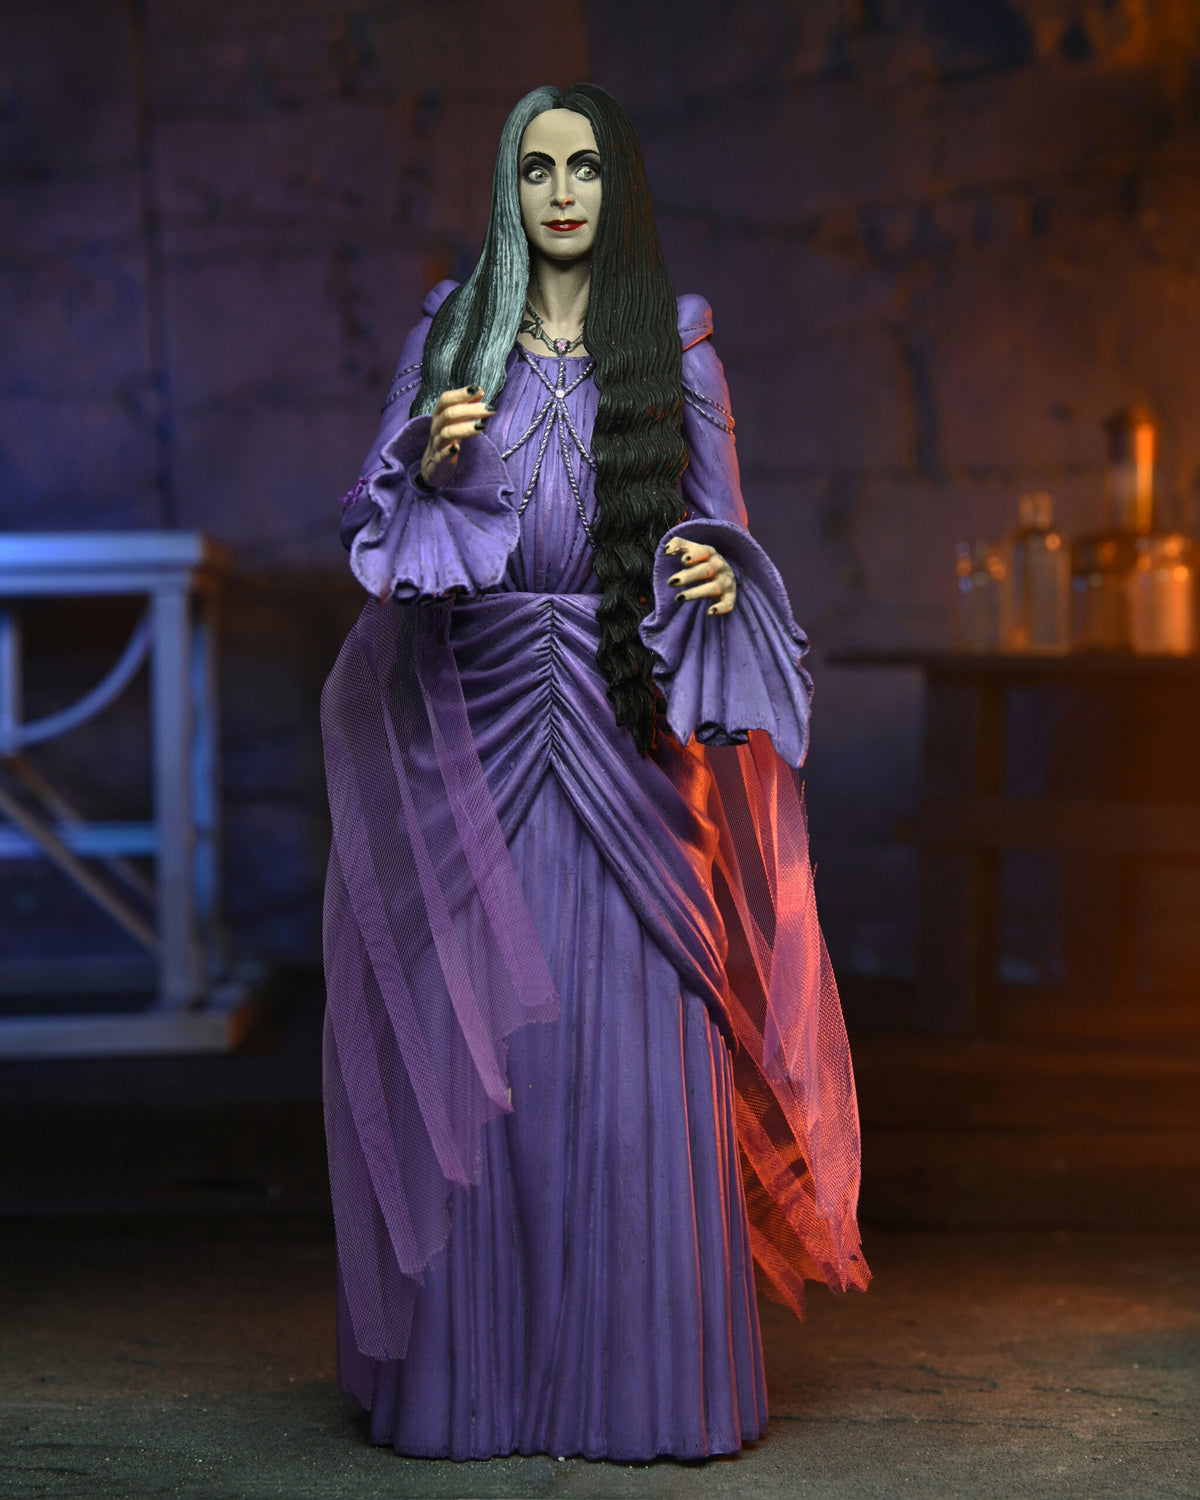 NECA - Rob Zombie’s The Munsters - Ultimate Lily Munster 7" Action Figure